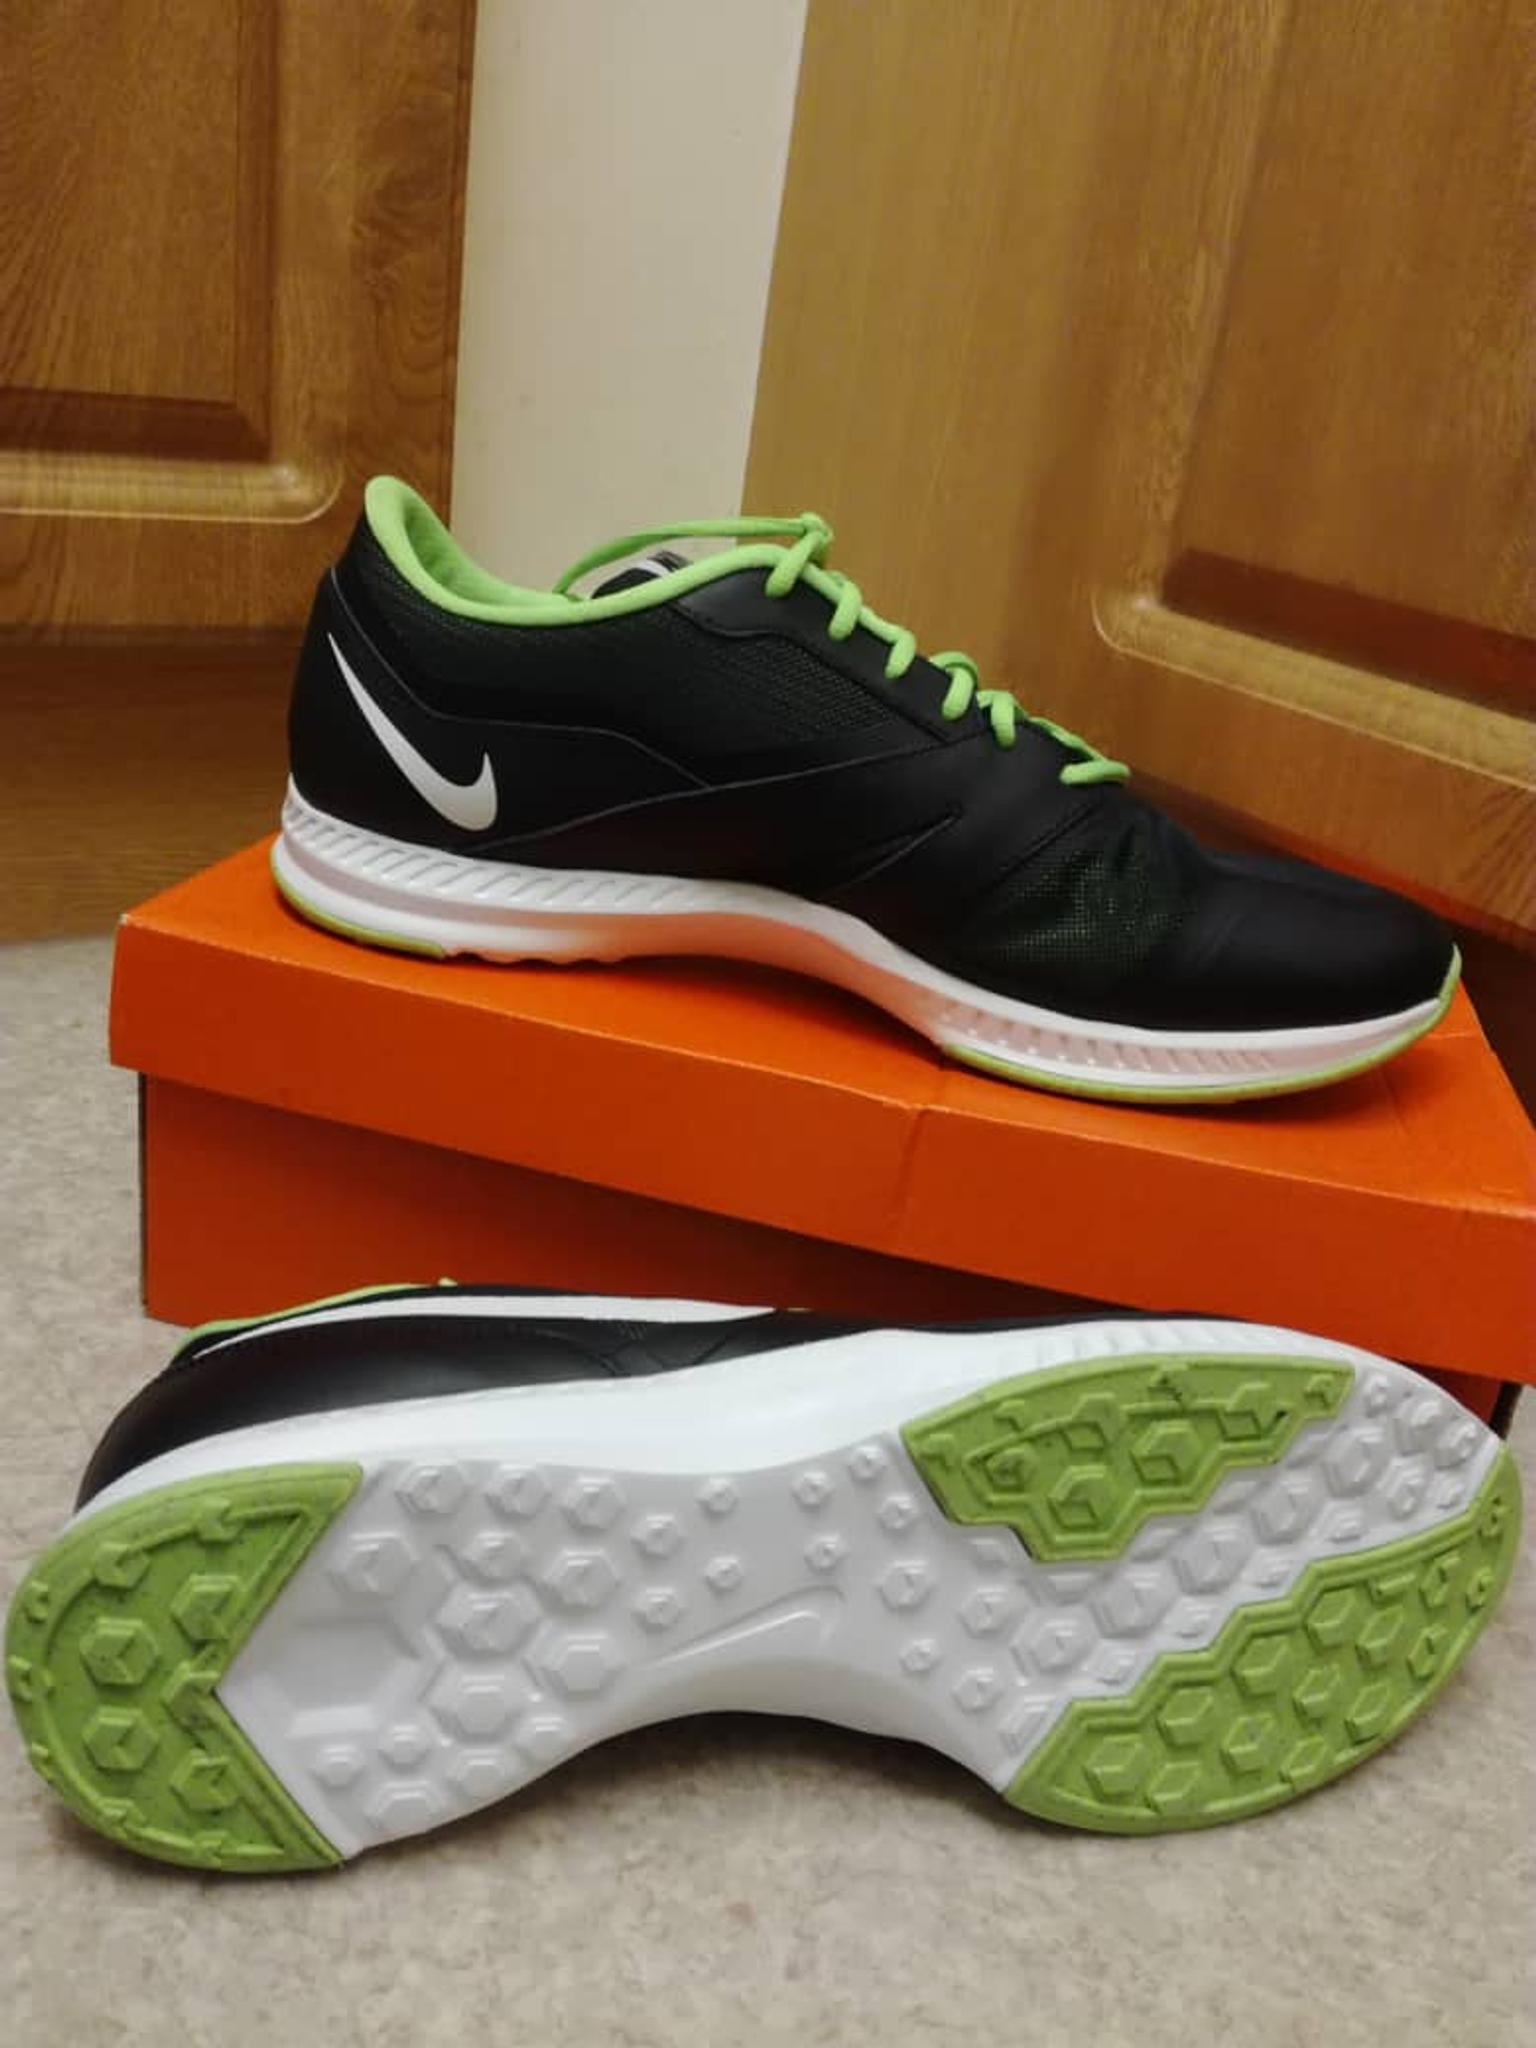 mens nike trainers size 14 uk